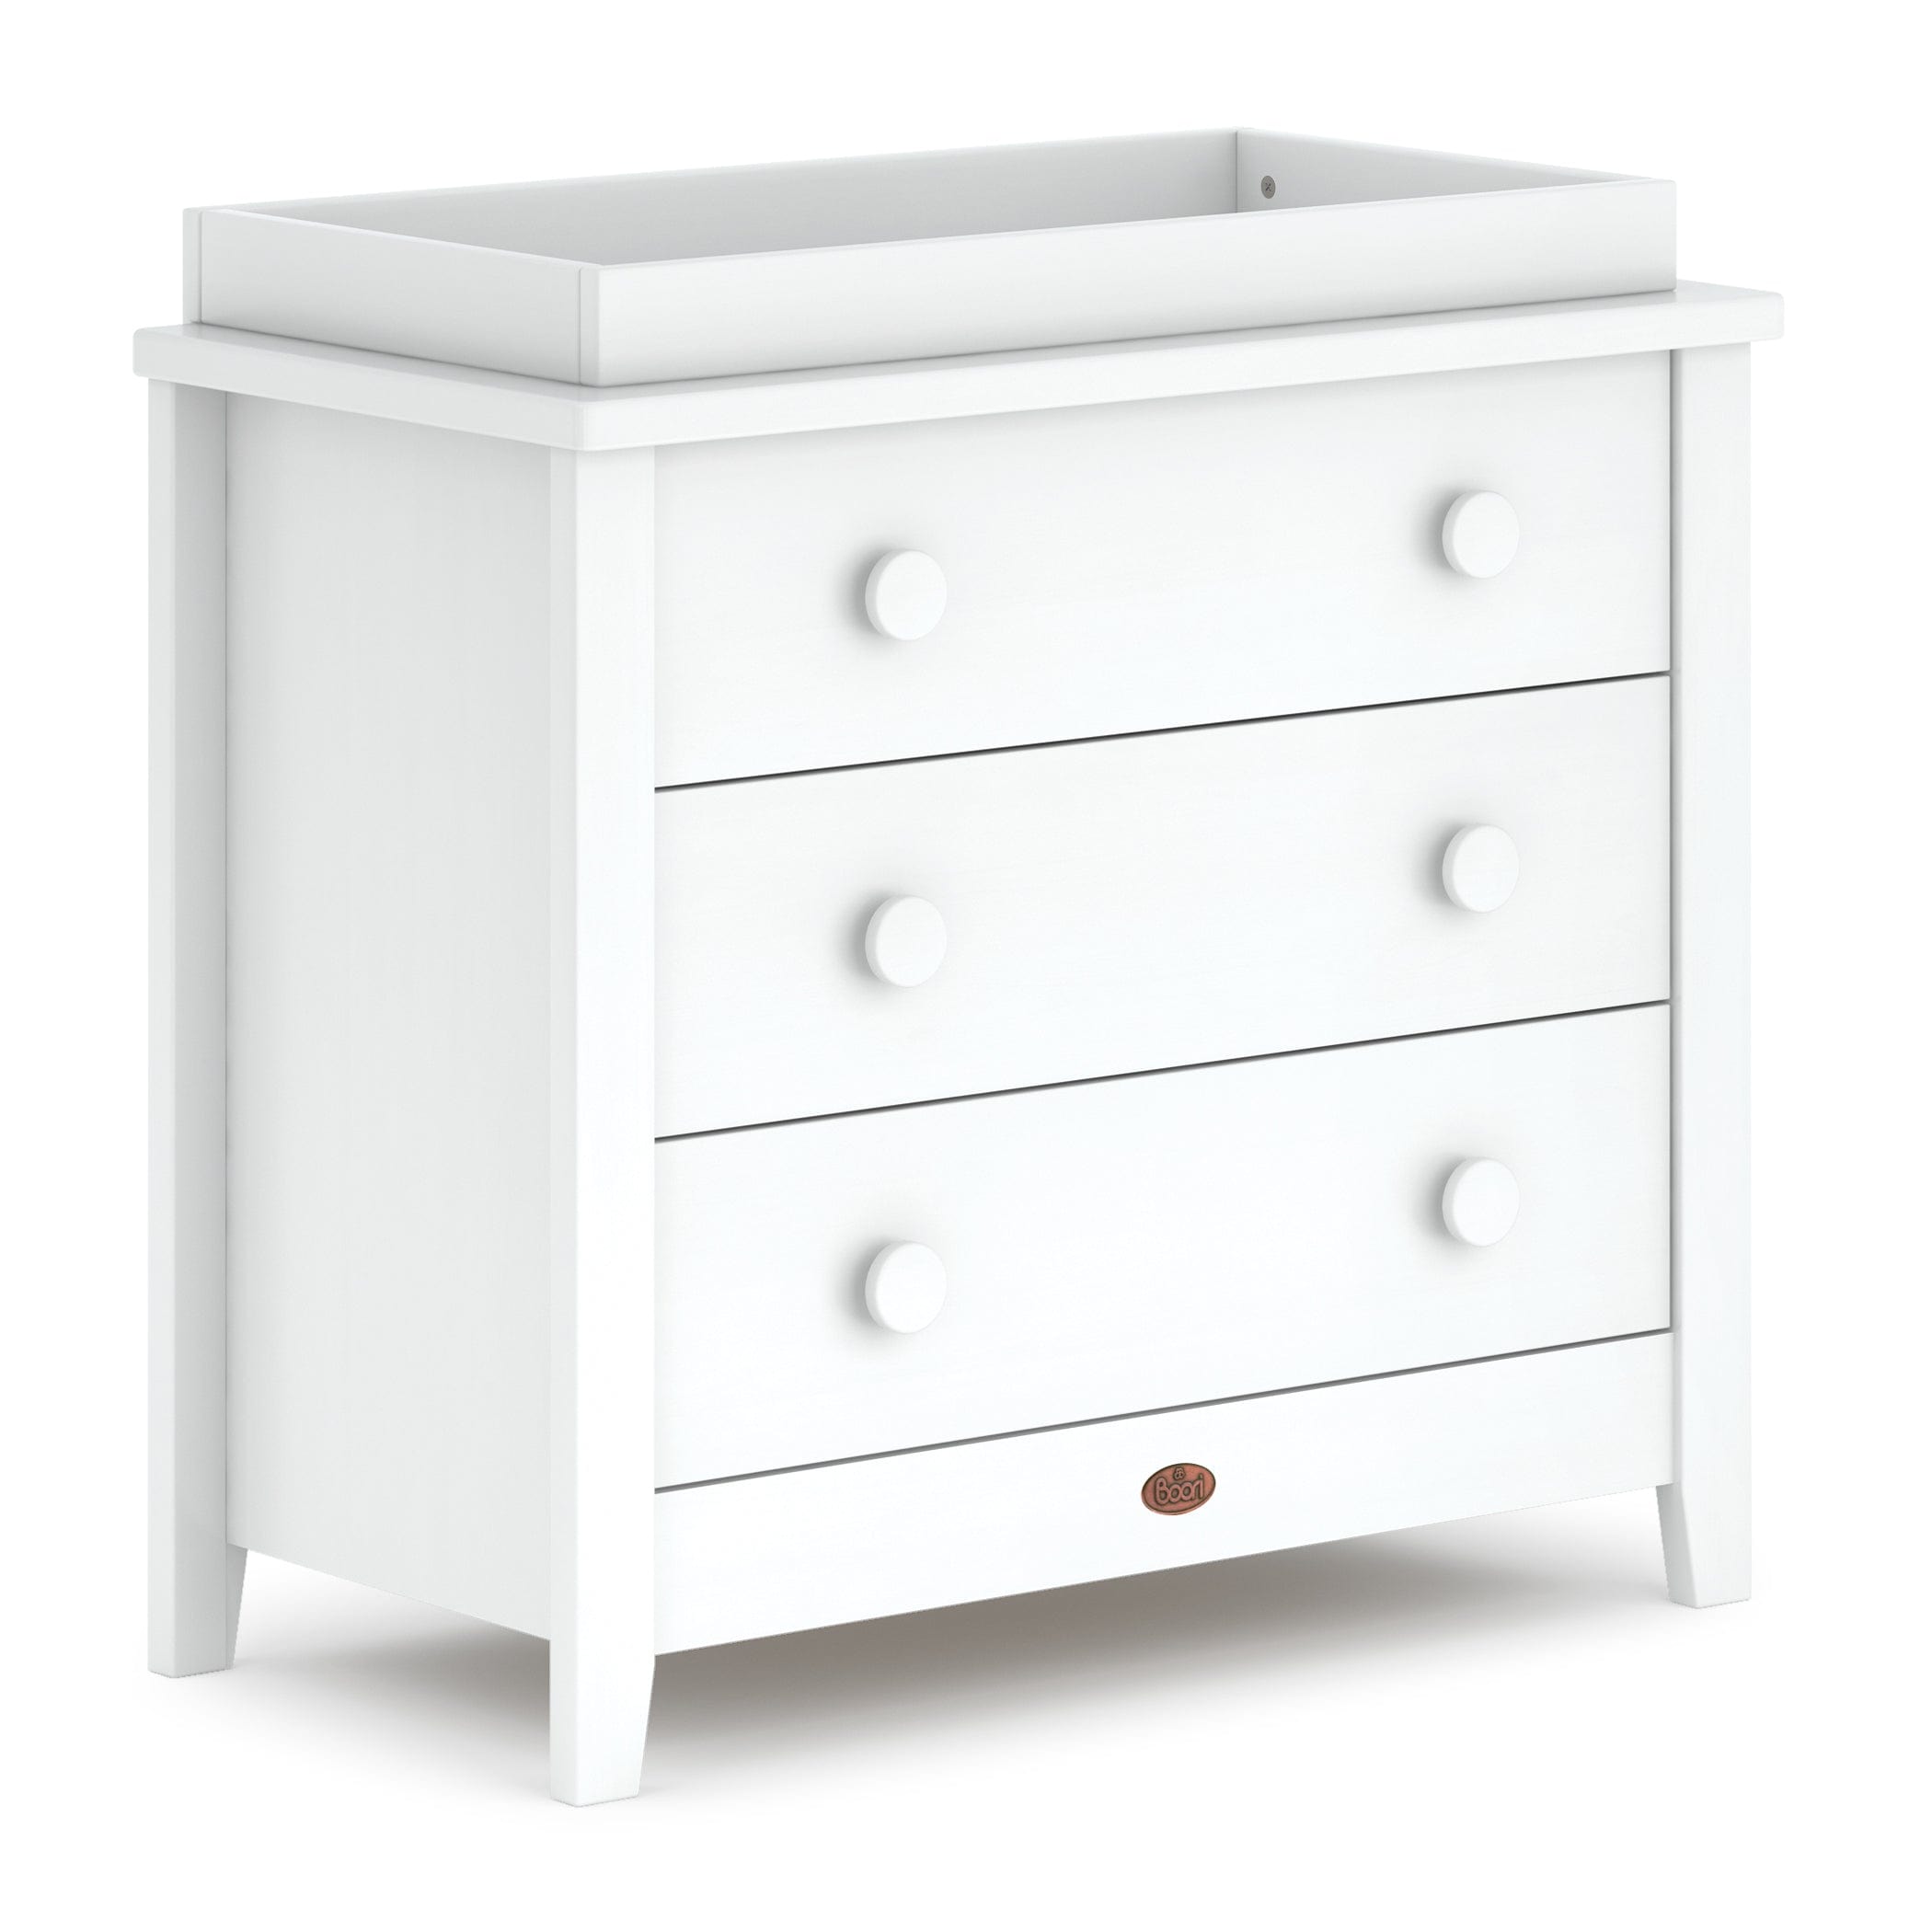 Boori 3 Drawer Chest Barley White Including Smart Assembly Chest Changing Tray Dressers & Changers B-3DCCHTV23-BA 9328730105736